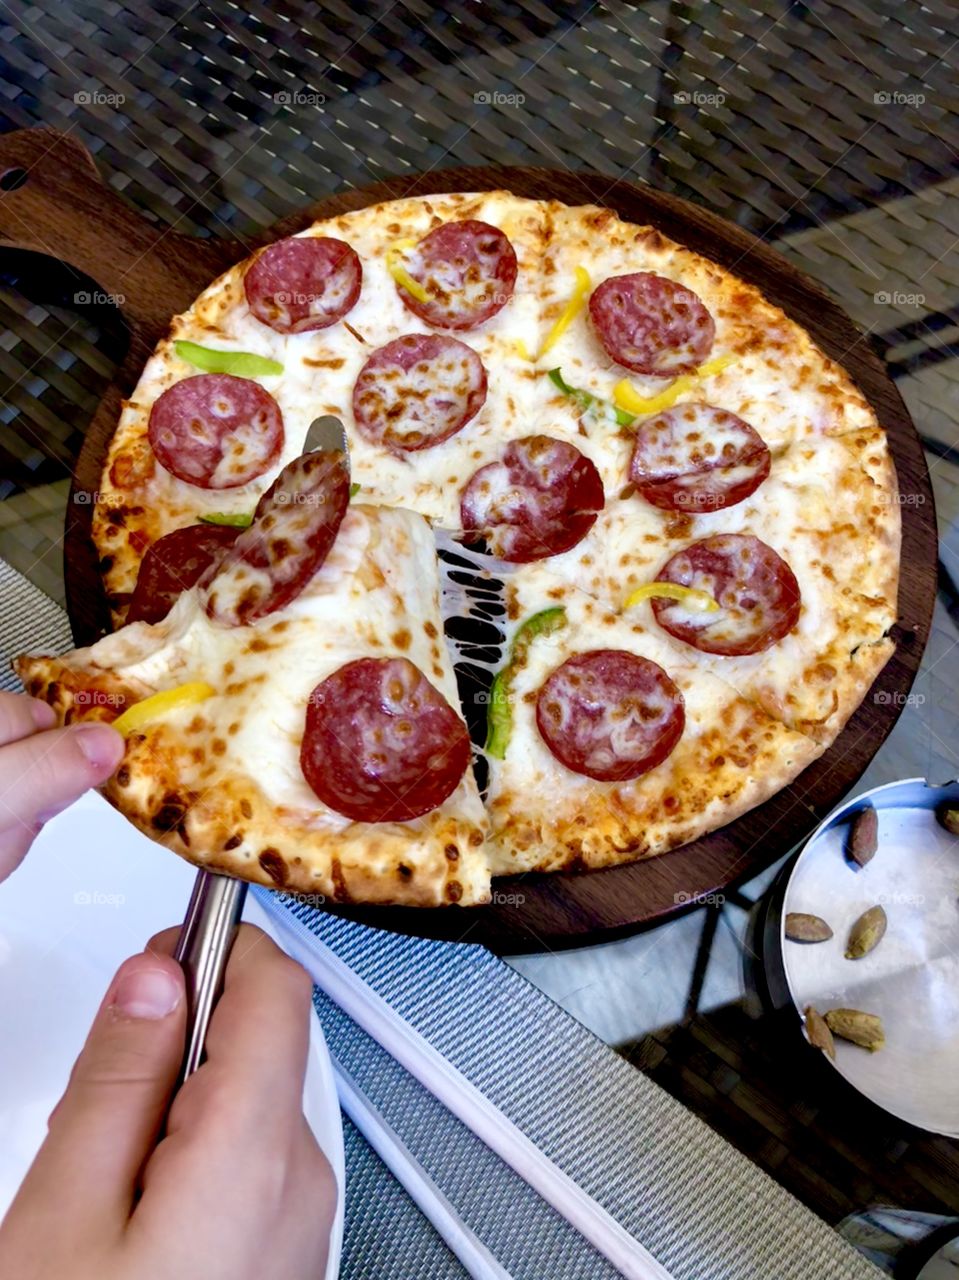 Pepperoni pizza is served 